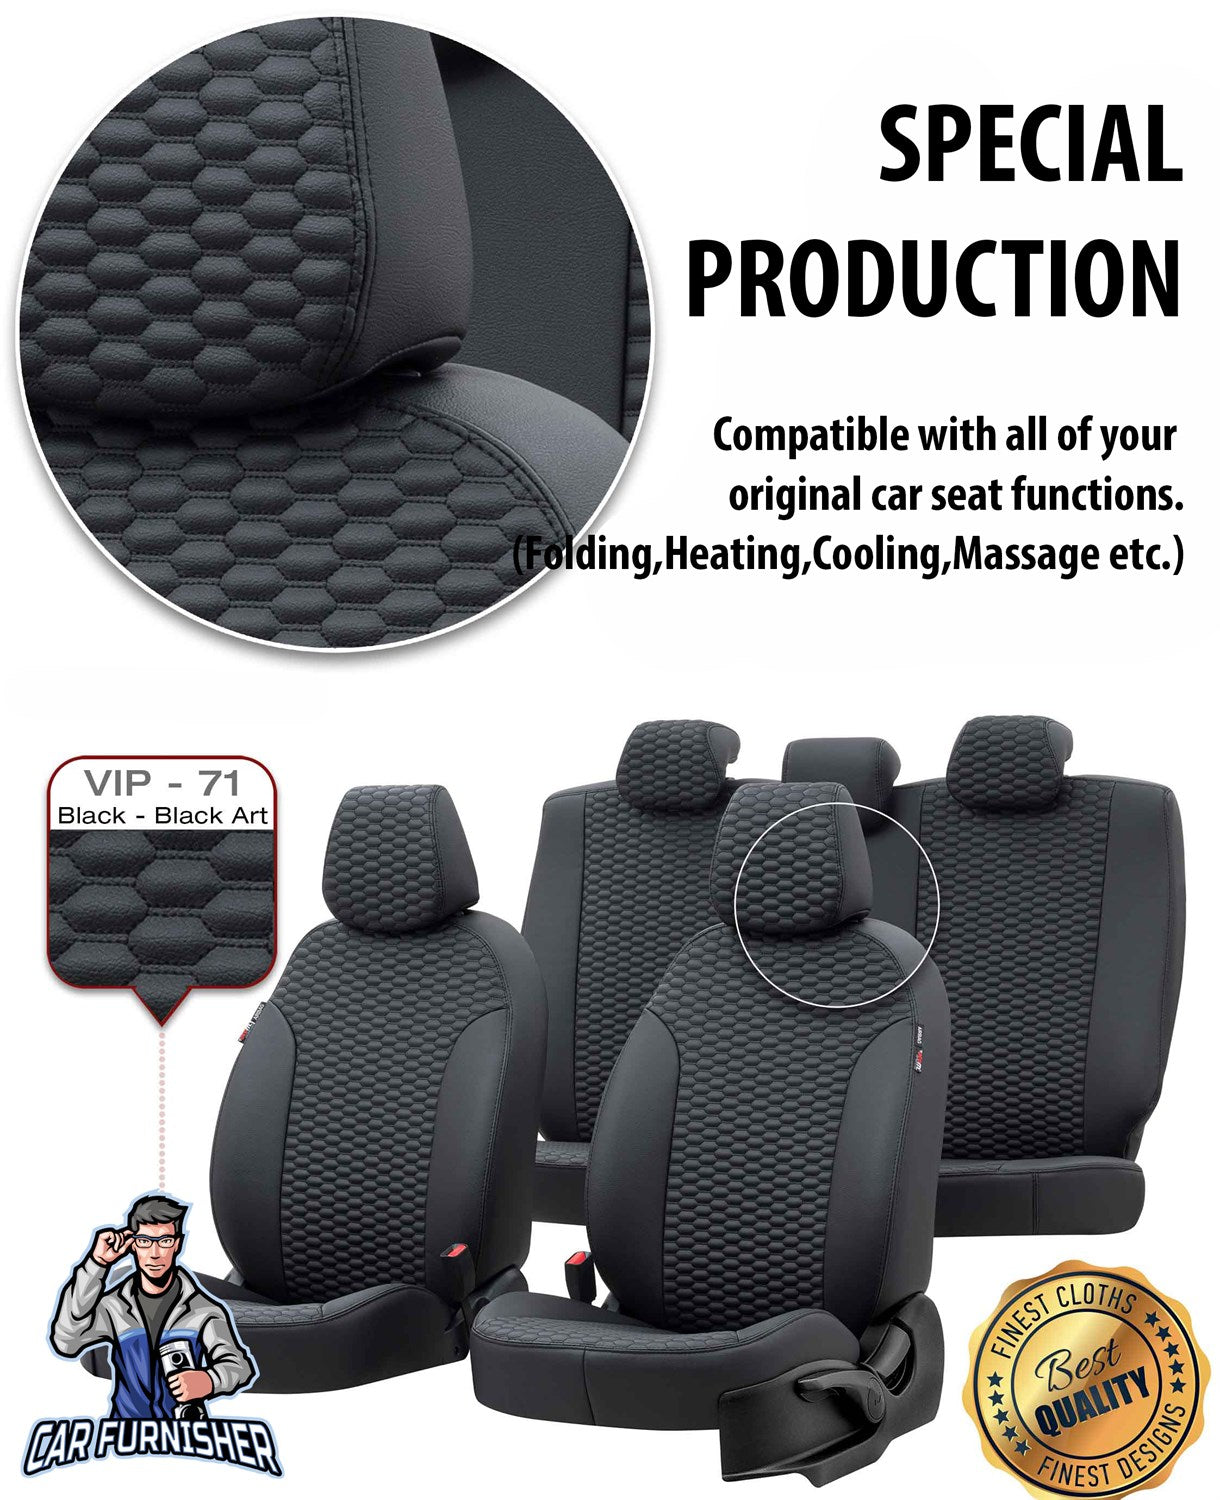 Mini Cooper Seat Covers Tokyo Leather Design Smoked Leather